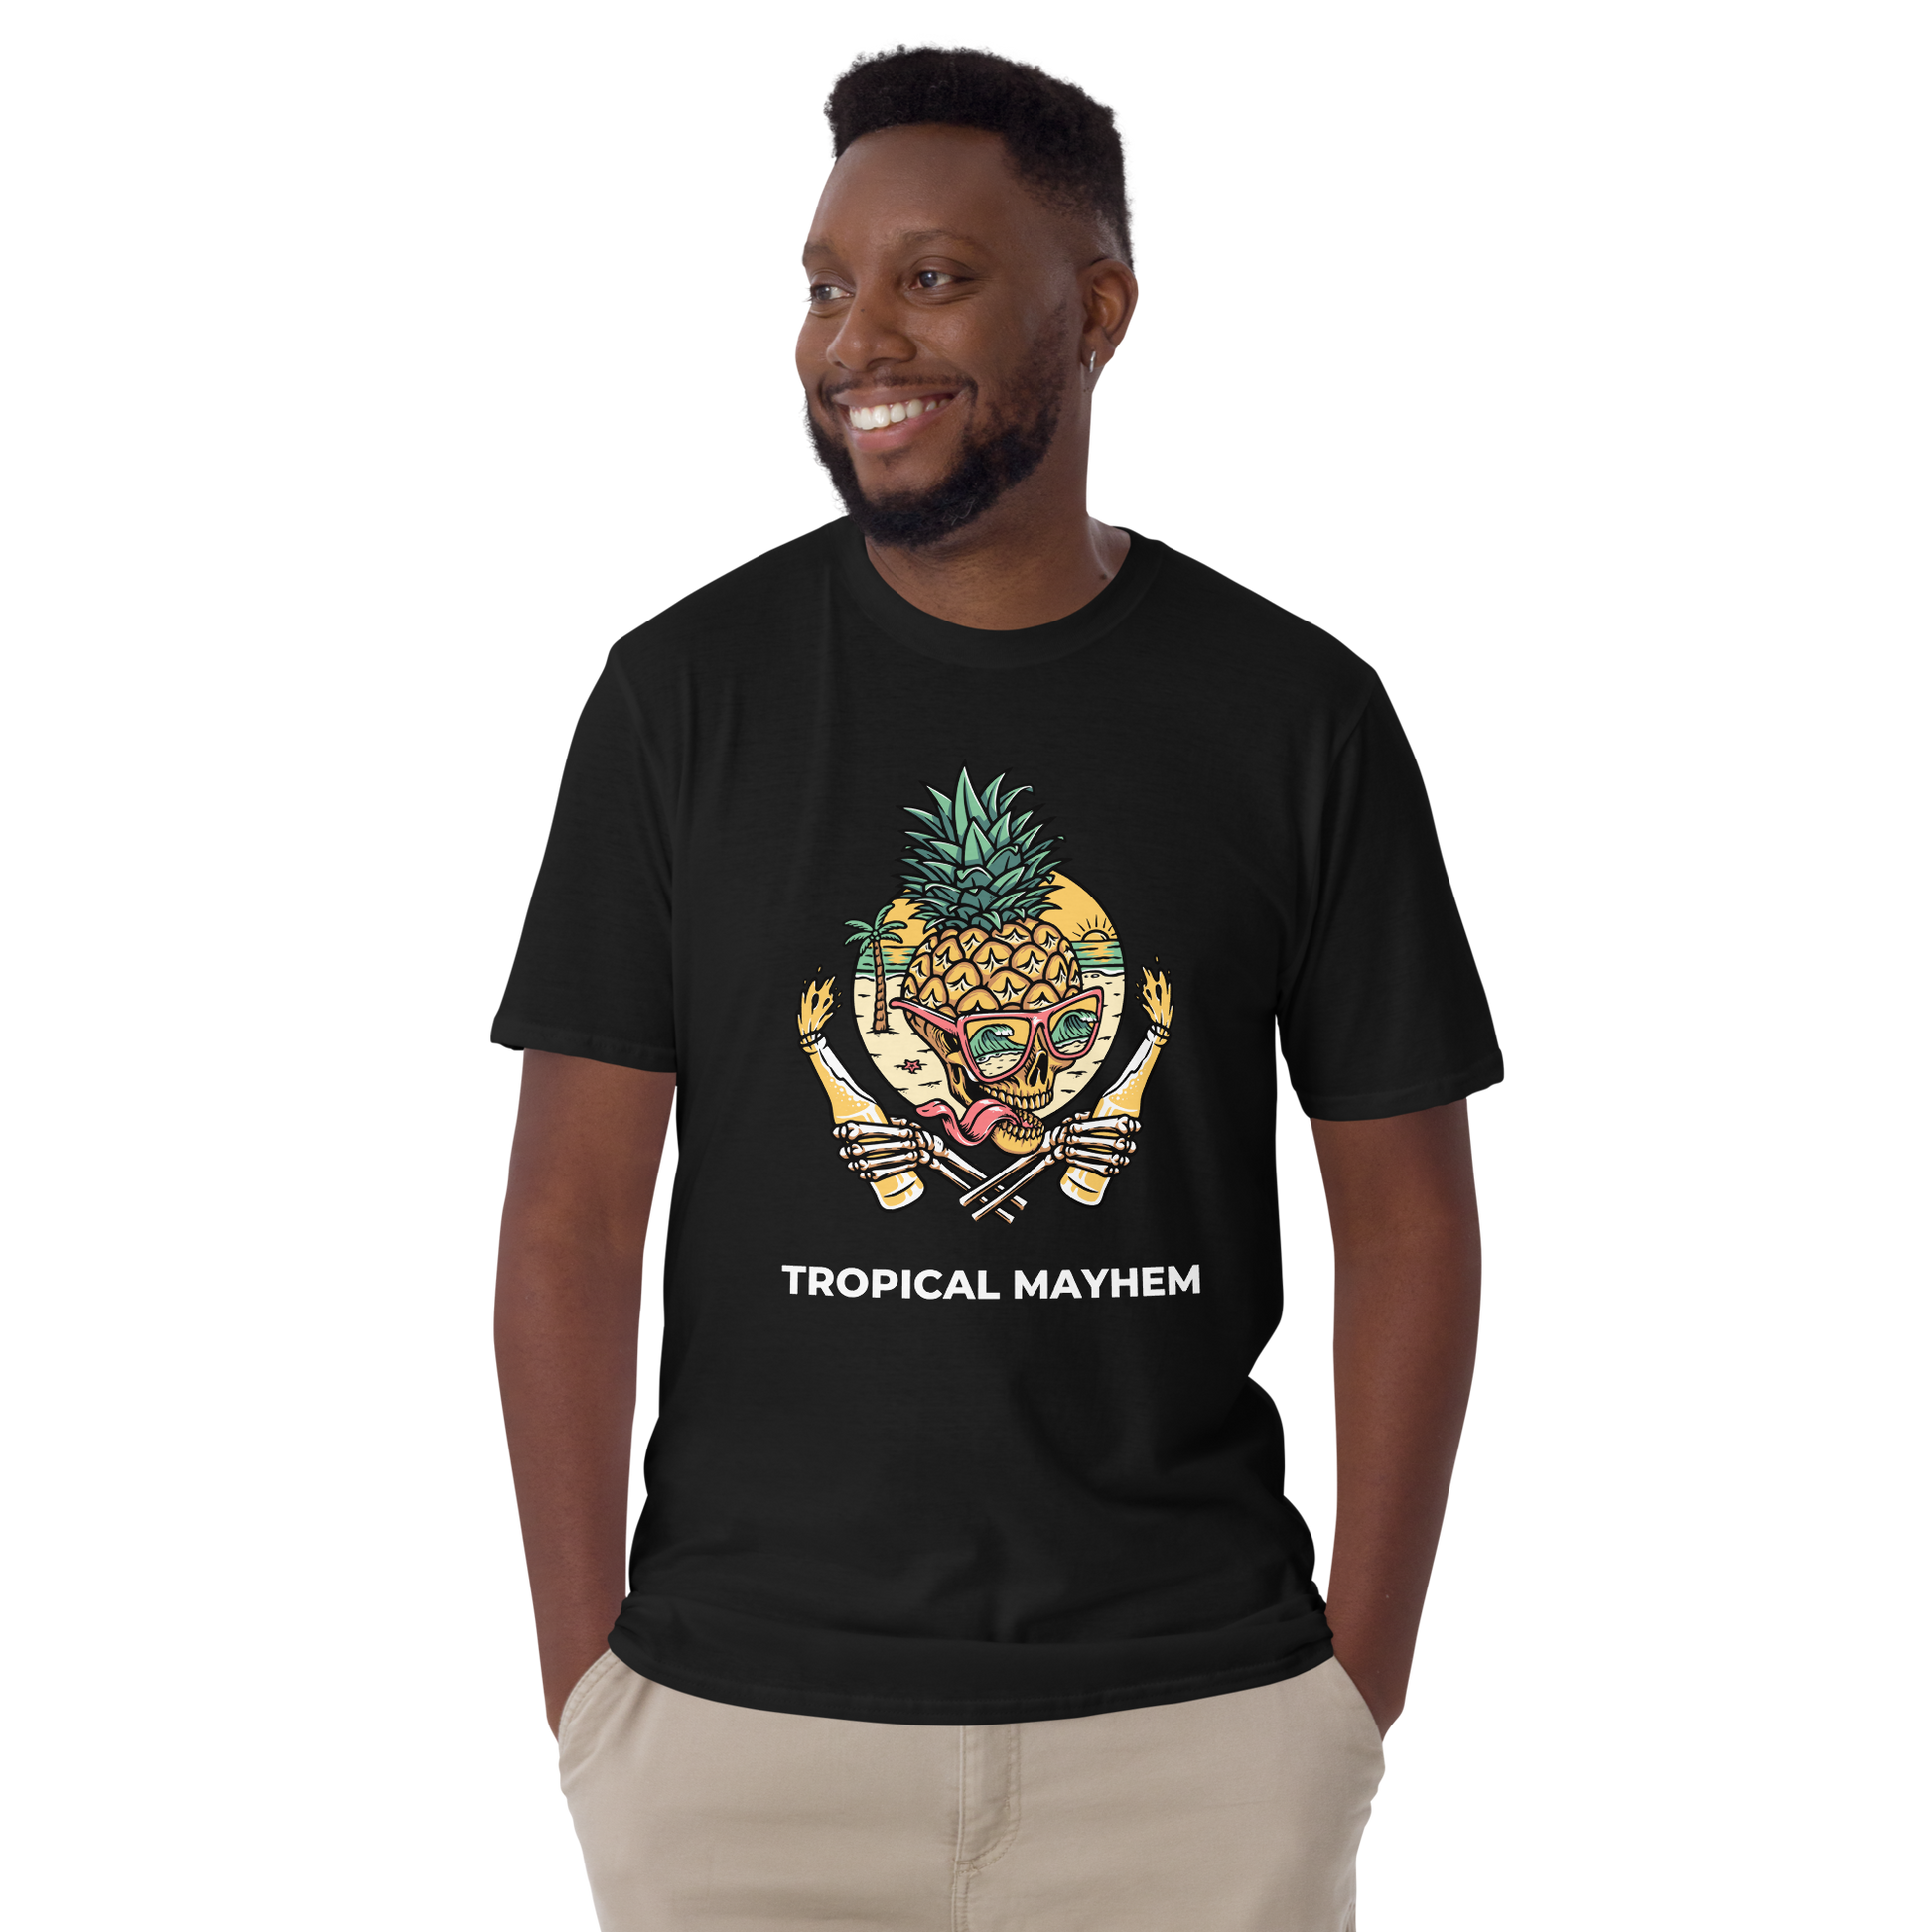 Smiling man wearing a Black Tropical Mayhem T-Shirt featuring a Crazy Pineapple Skull graphic on the chest - Funny Graphic Pineapple T-Shirts - Boozy Fox